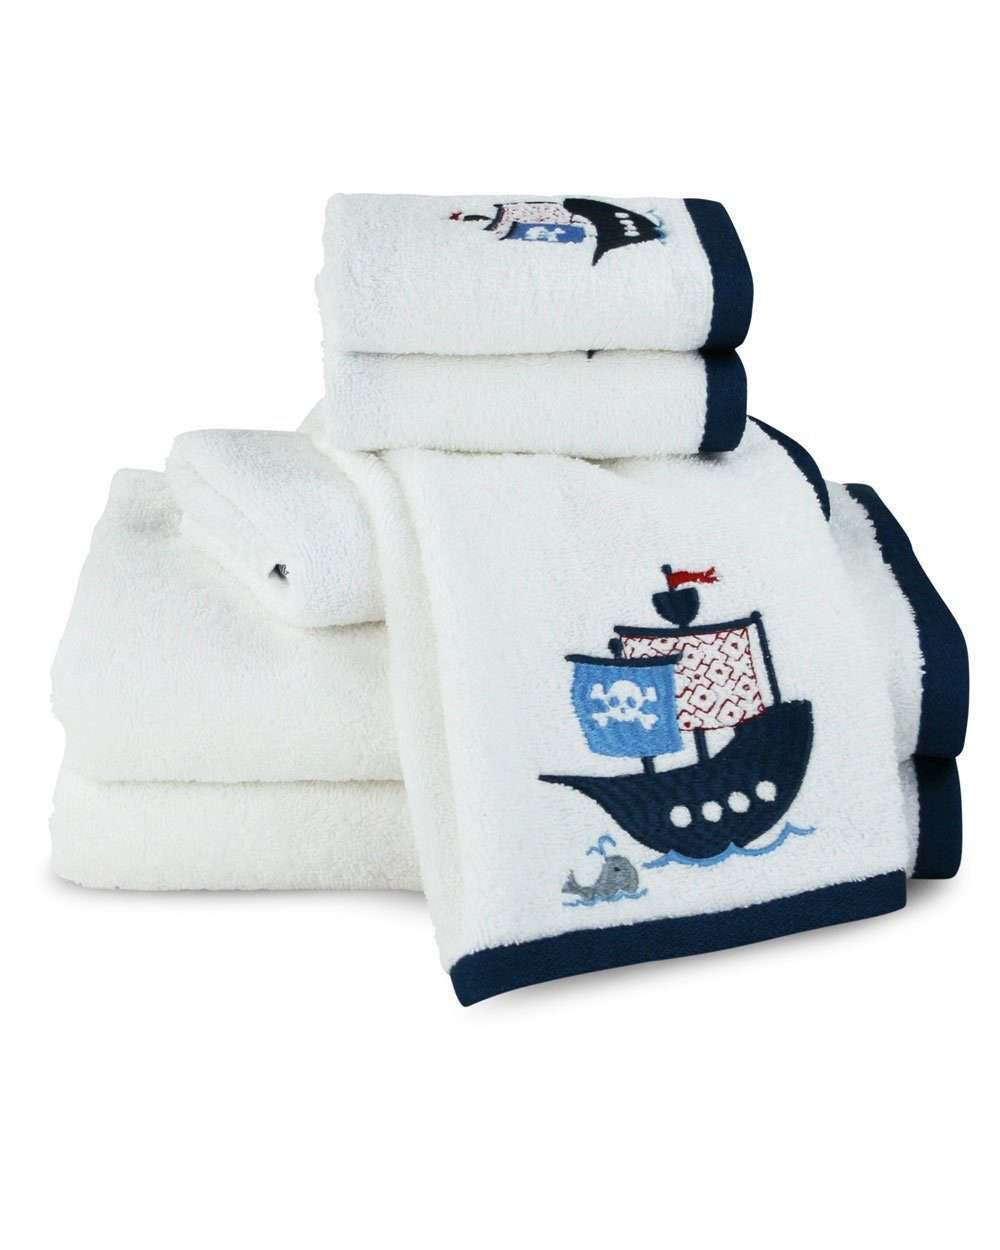 Bambi Embroidered Pirate Towels - Luxor Linens 